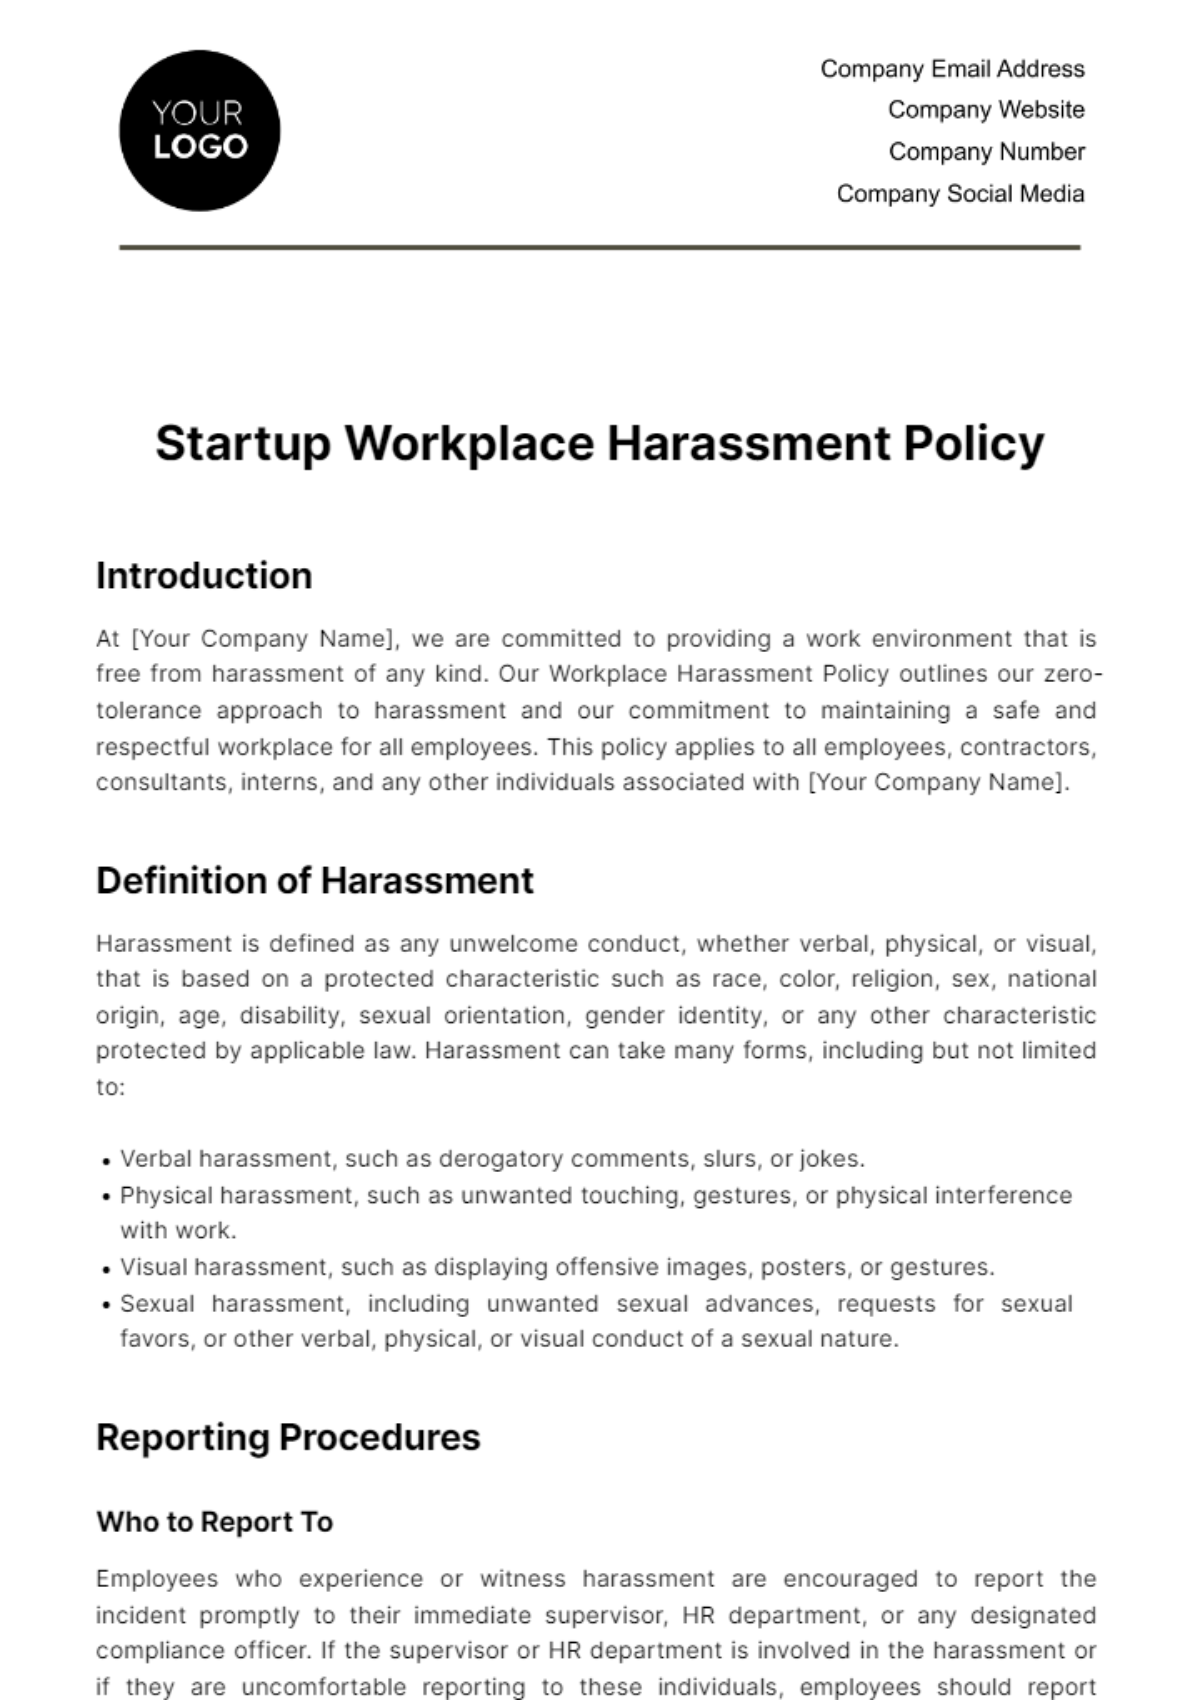 Free Startup Workplace Harassment Policy Template